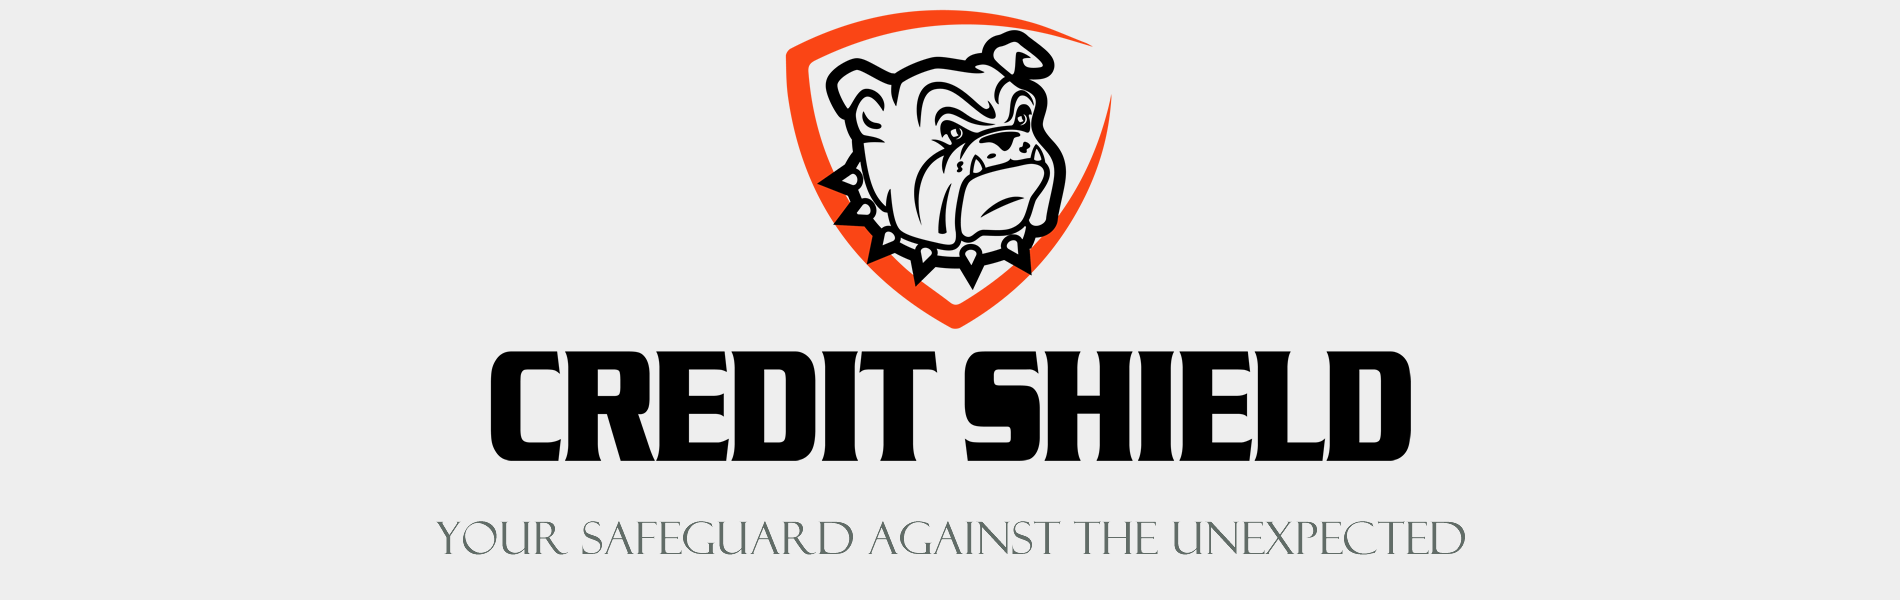 credit shield, your safeguard against the unexpected